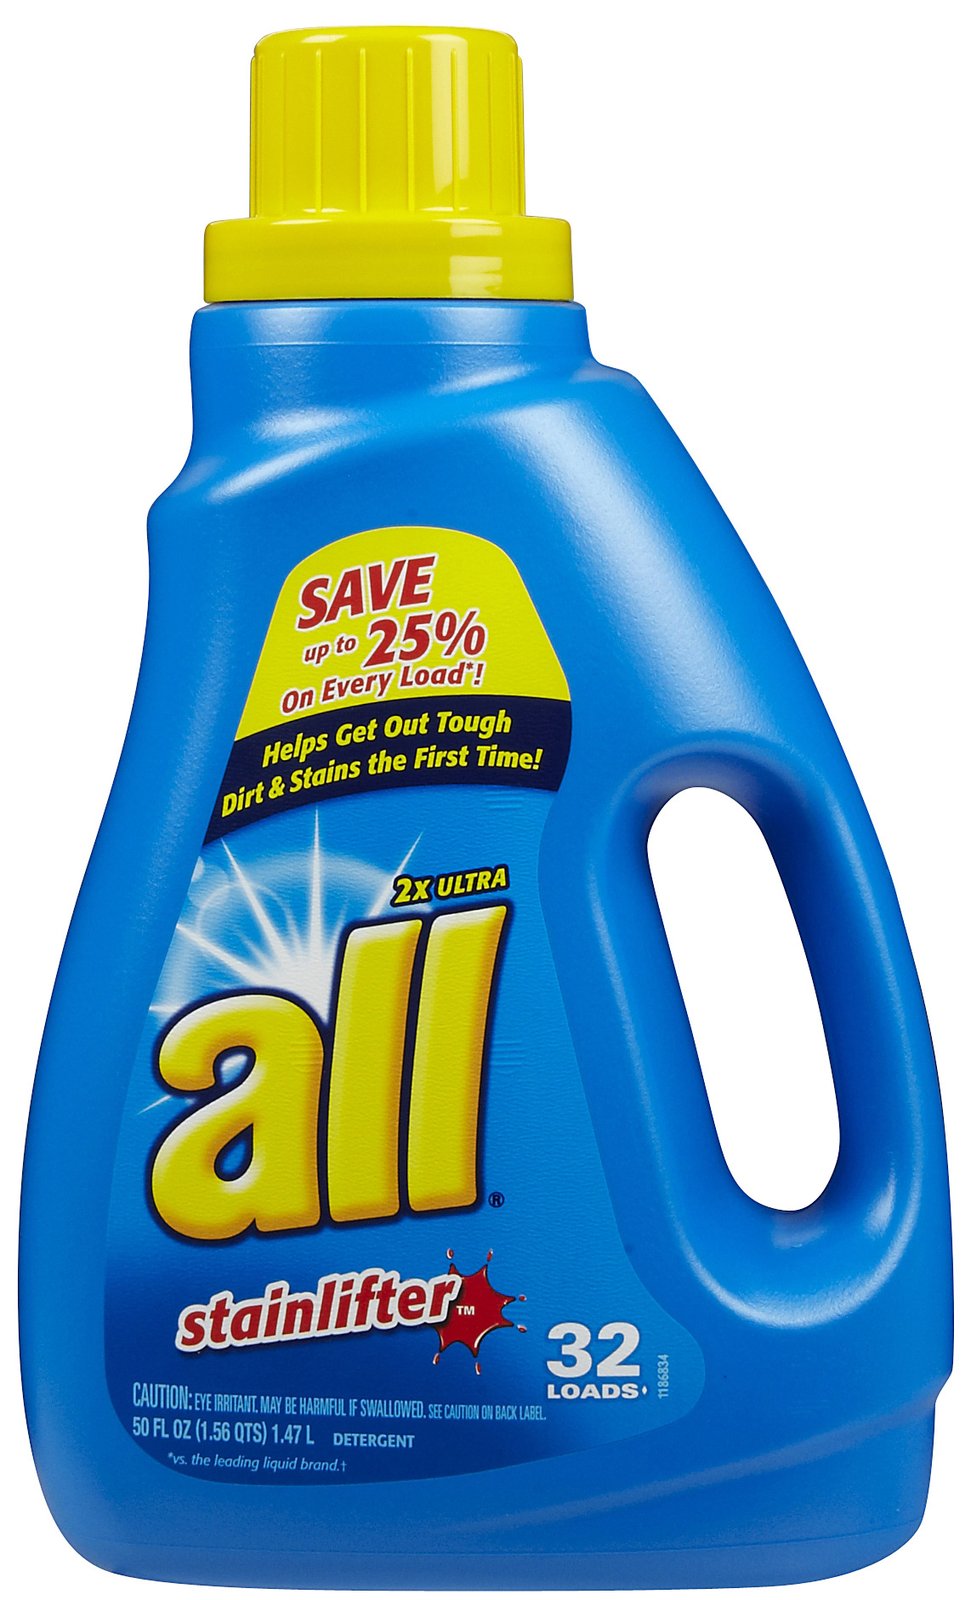 All Detergent or Mighty Pacs Only $2.00 at CVS